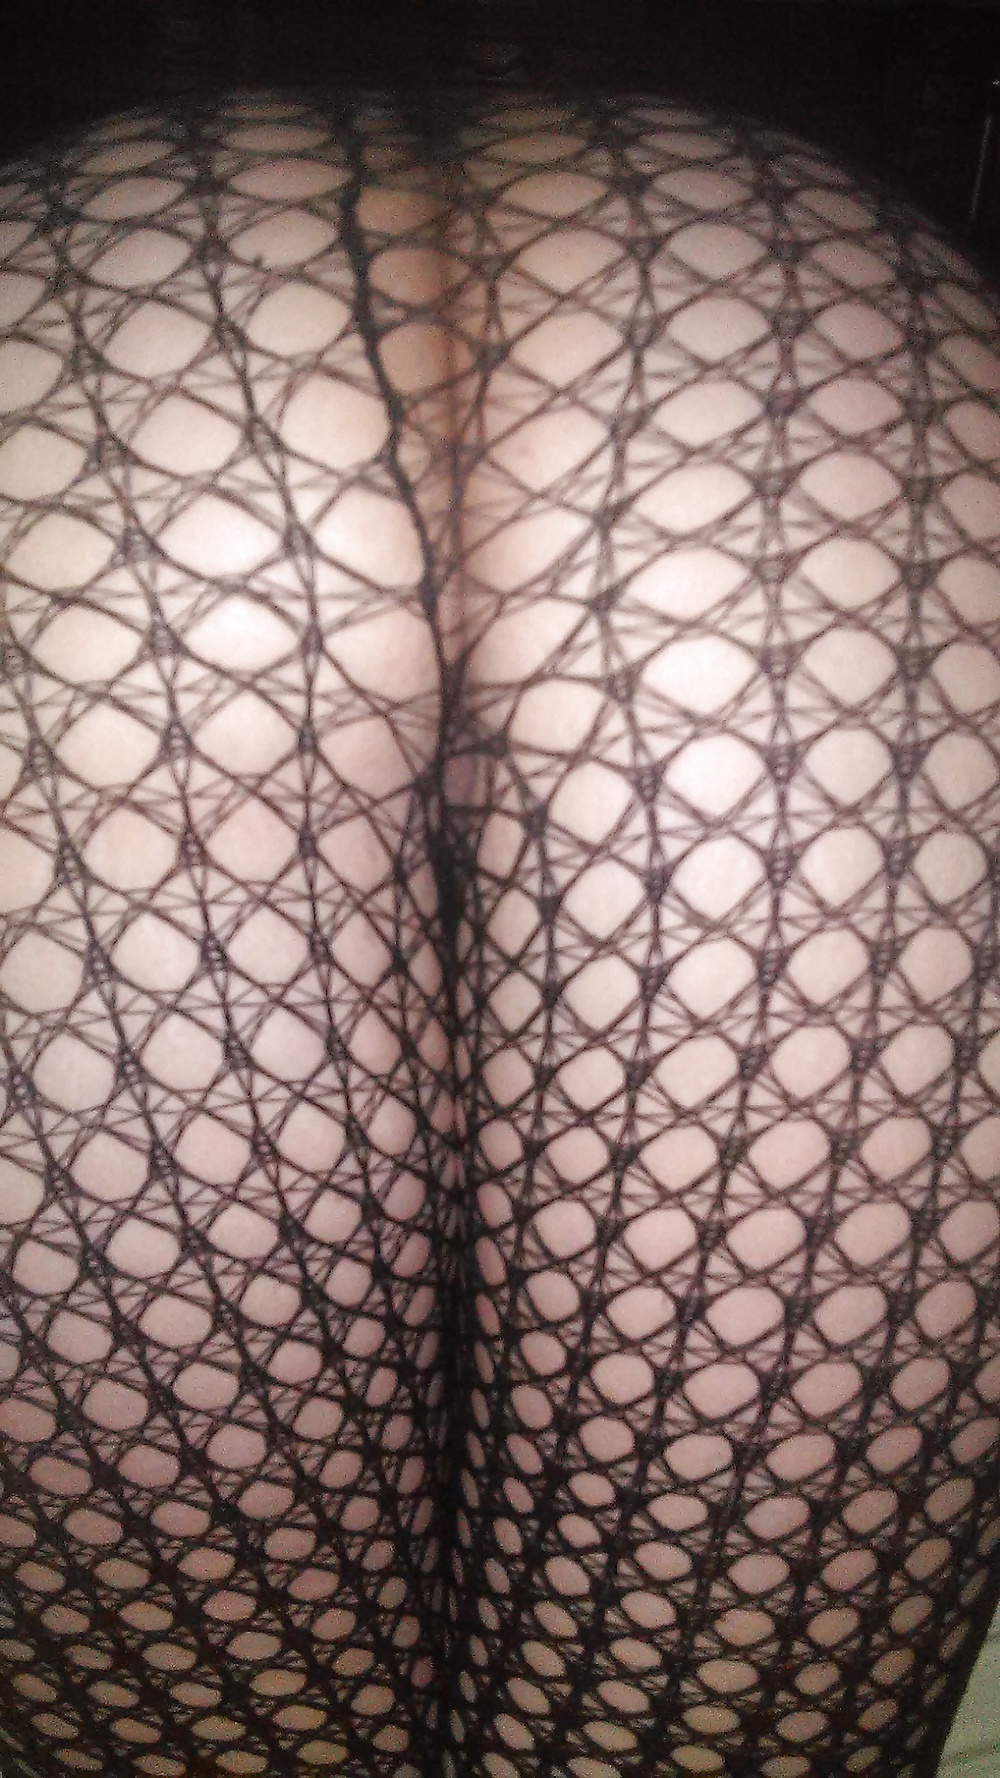 Sex Wife in stockings image